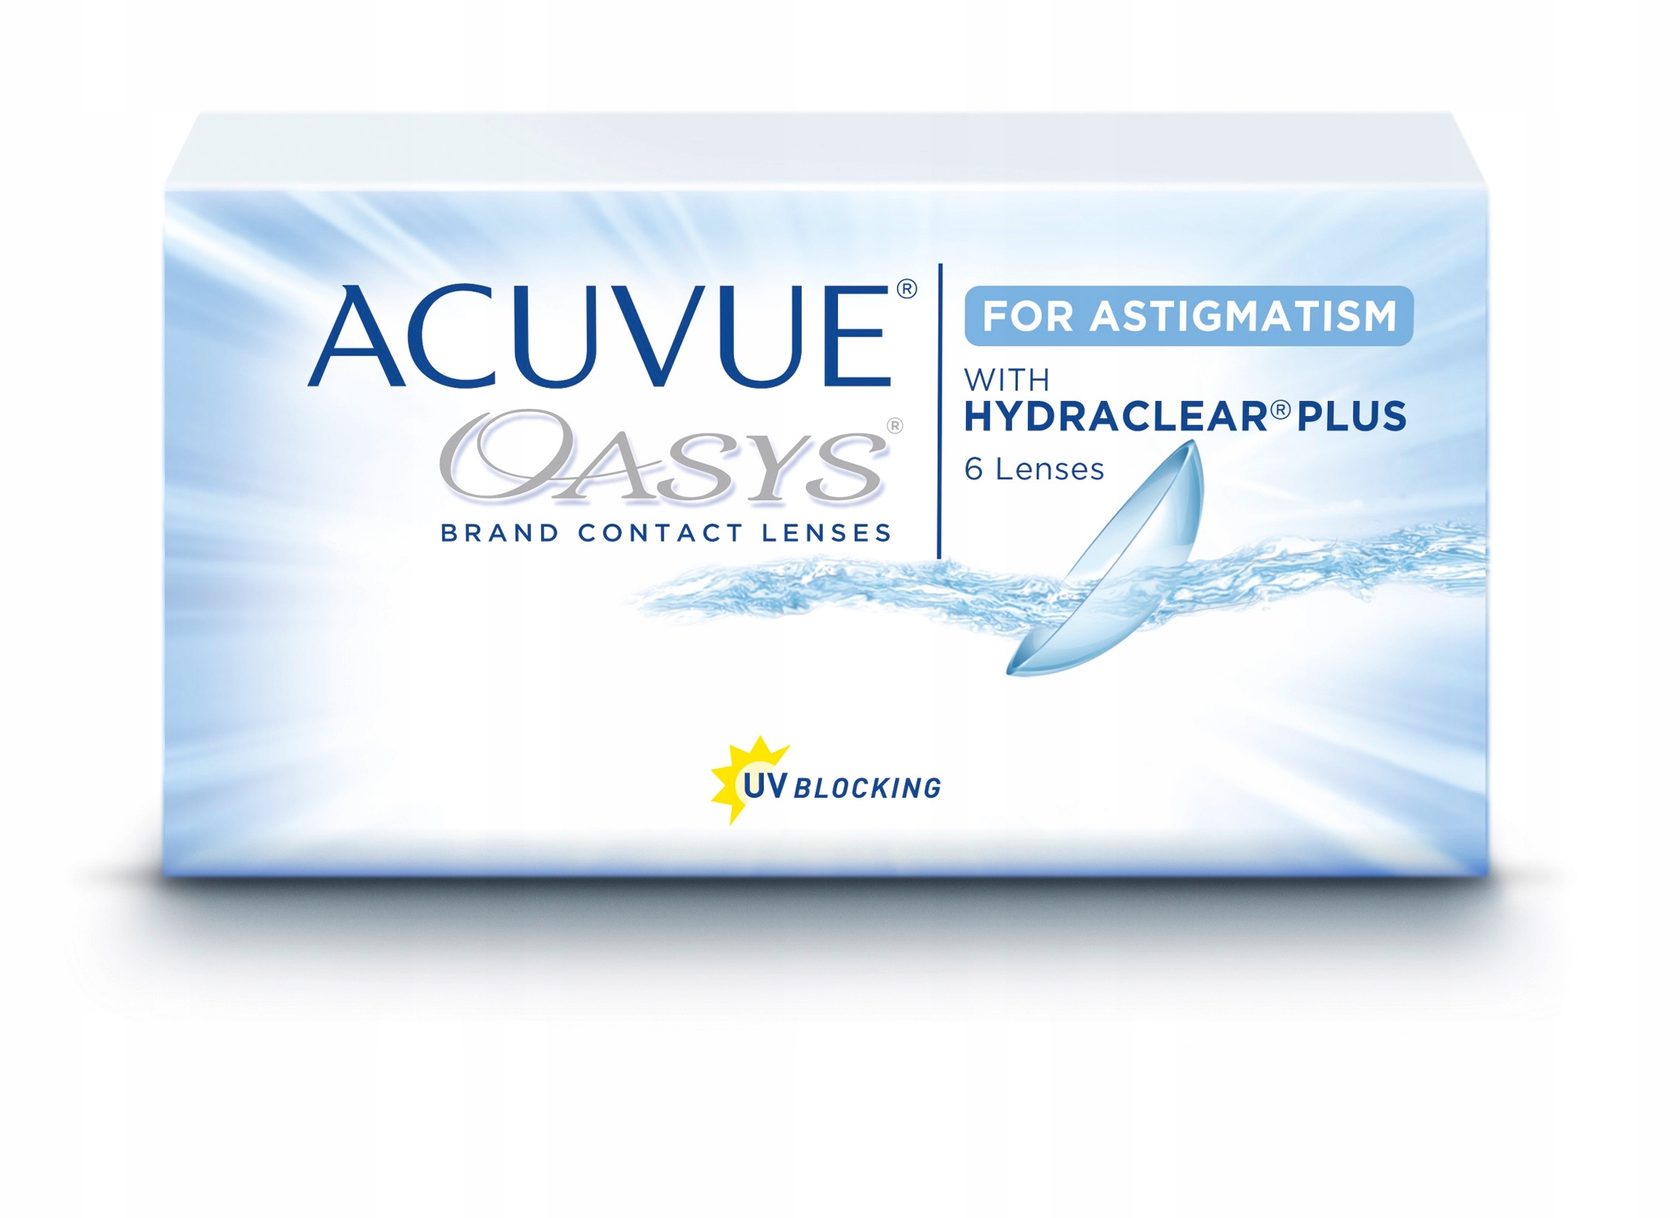 Acuvue oasys недельные. Acuvue Oasys for Astigmatism 2 недельные. Acuvue Oasys 2 недельные. Acuvue Oasys for Astigmatism. Линзы Acuvue Oasys for Astigmatism.